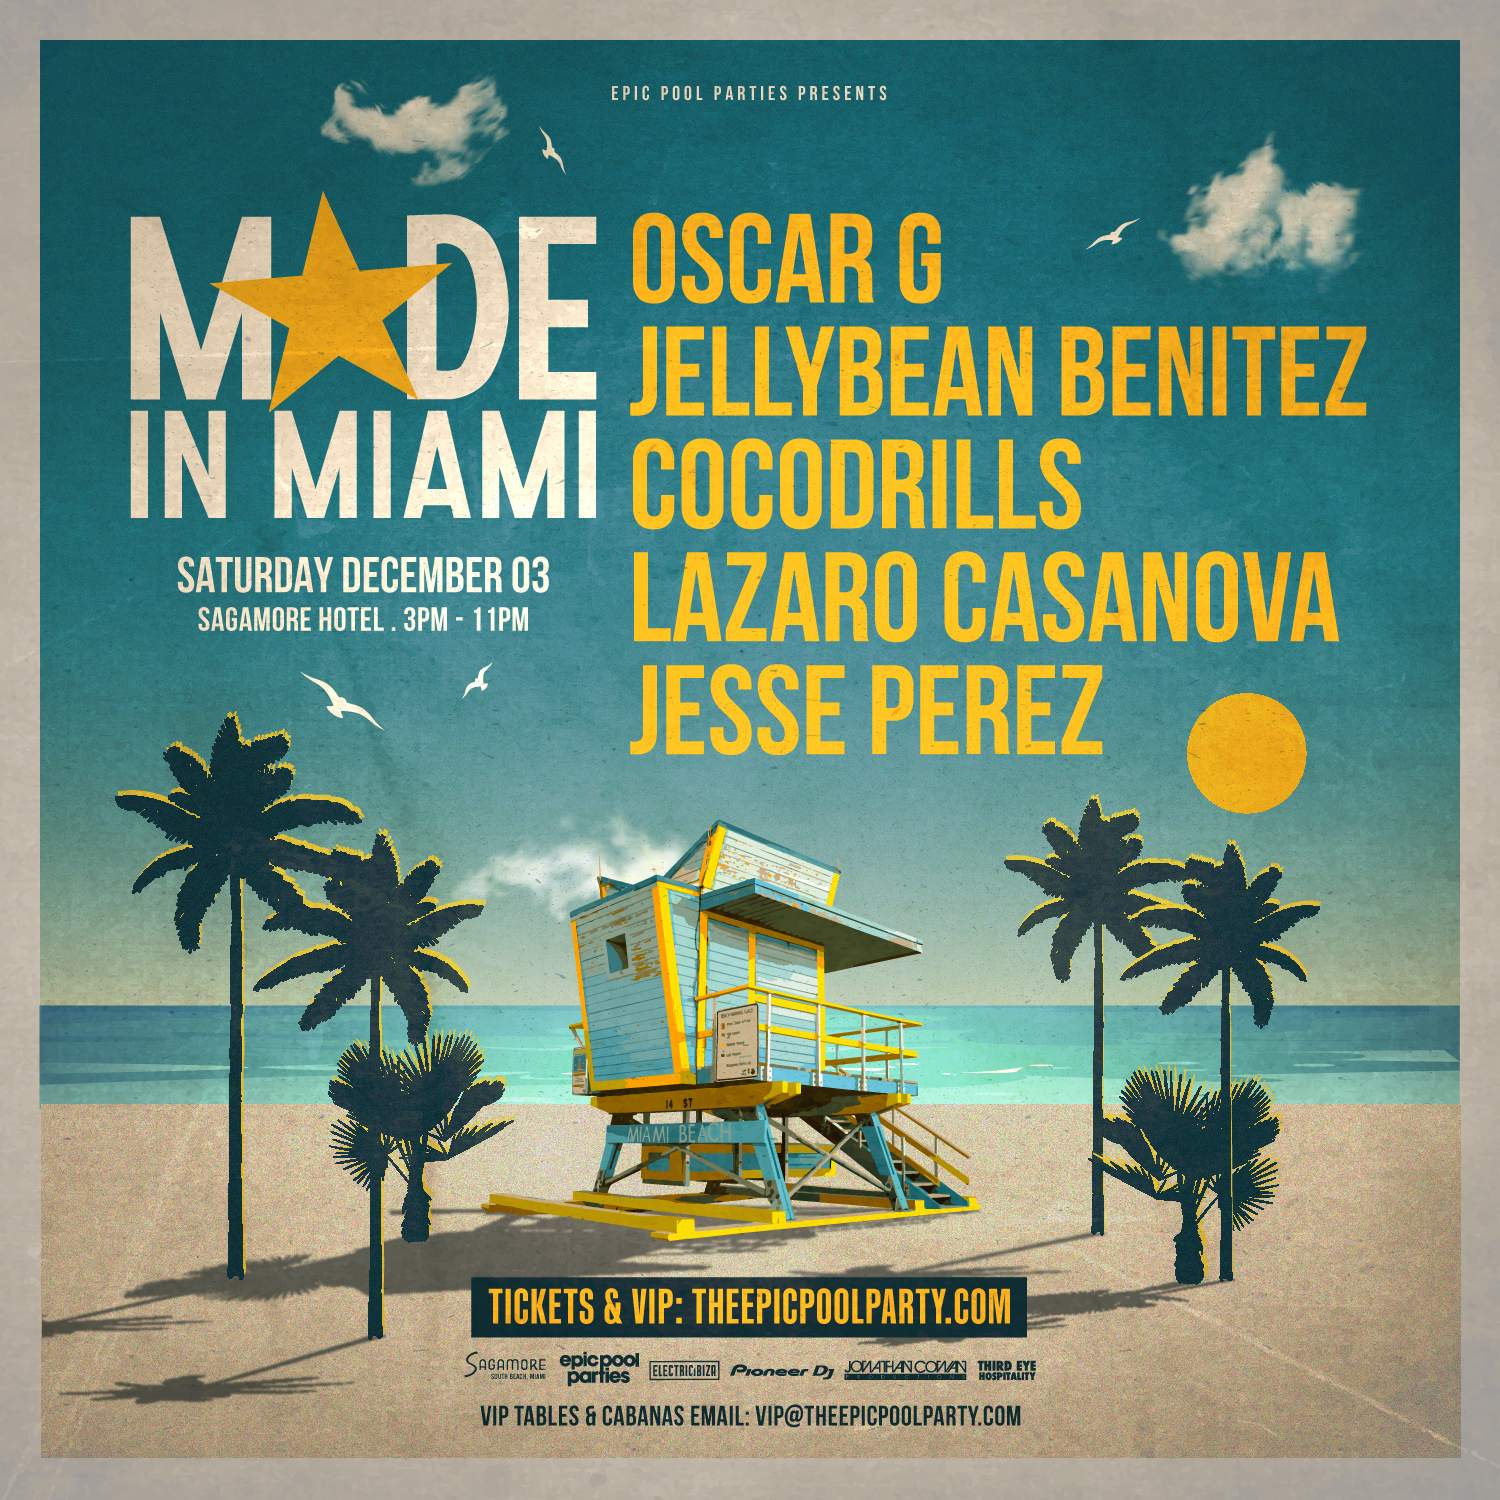 Epic Pool Parties pres. Made in Miami - Oscar G & friends - フライヤー表